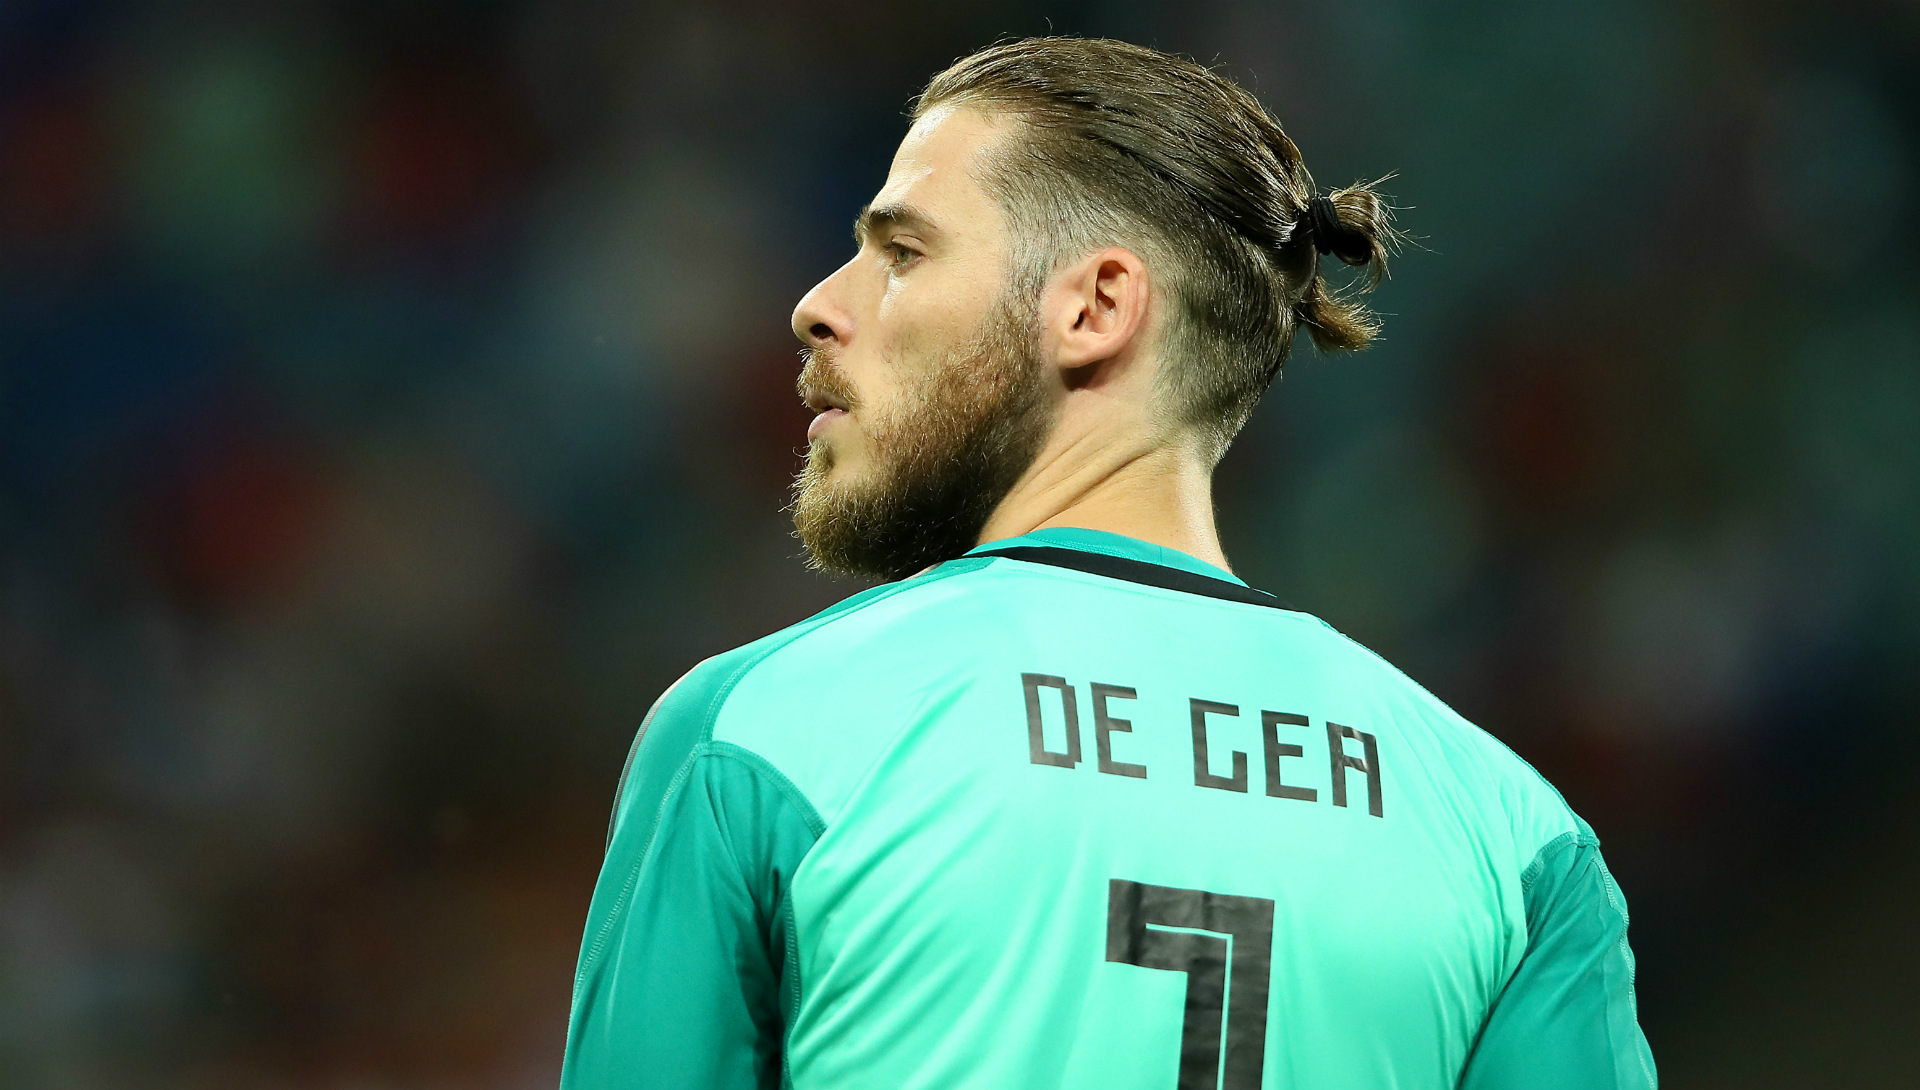 why spain would have been wrong to drop de gea